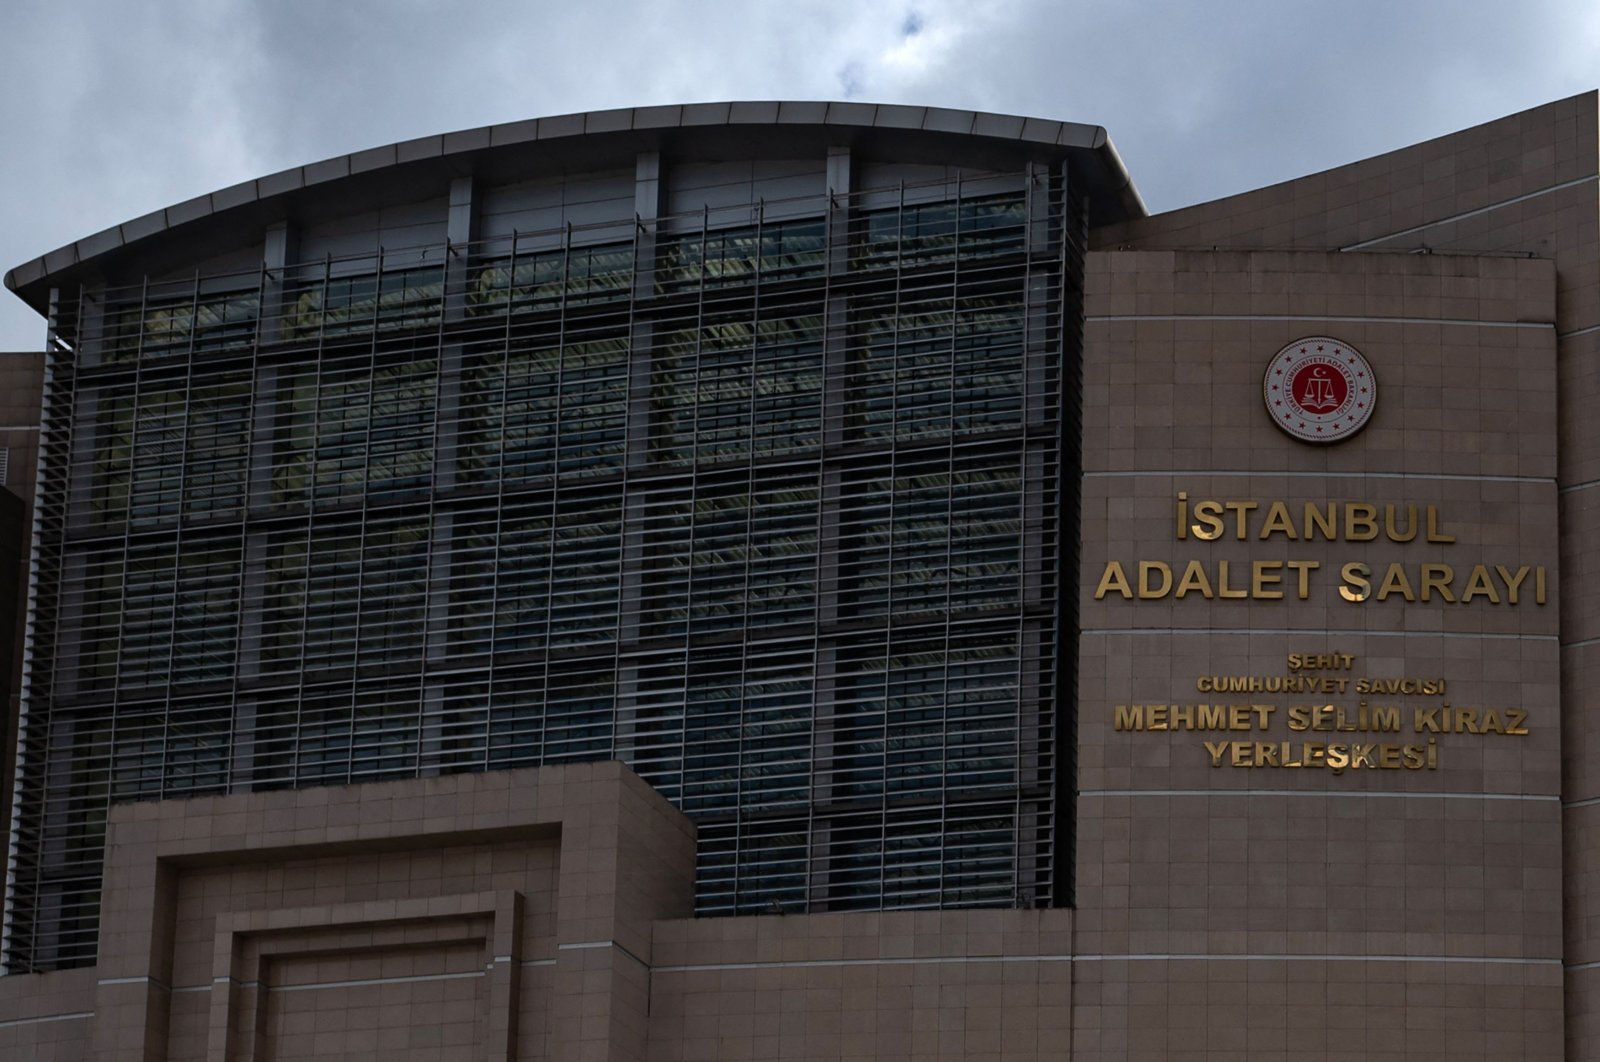 A view of the logo and sign of the Çağlayan Justice Palace courthouse in Istanbul on March 21, 2022. (AFP)